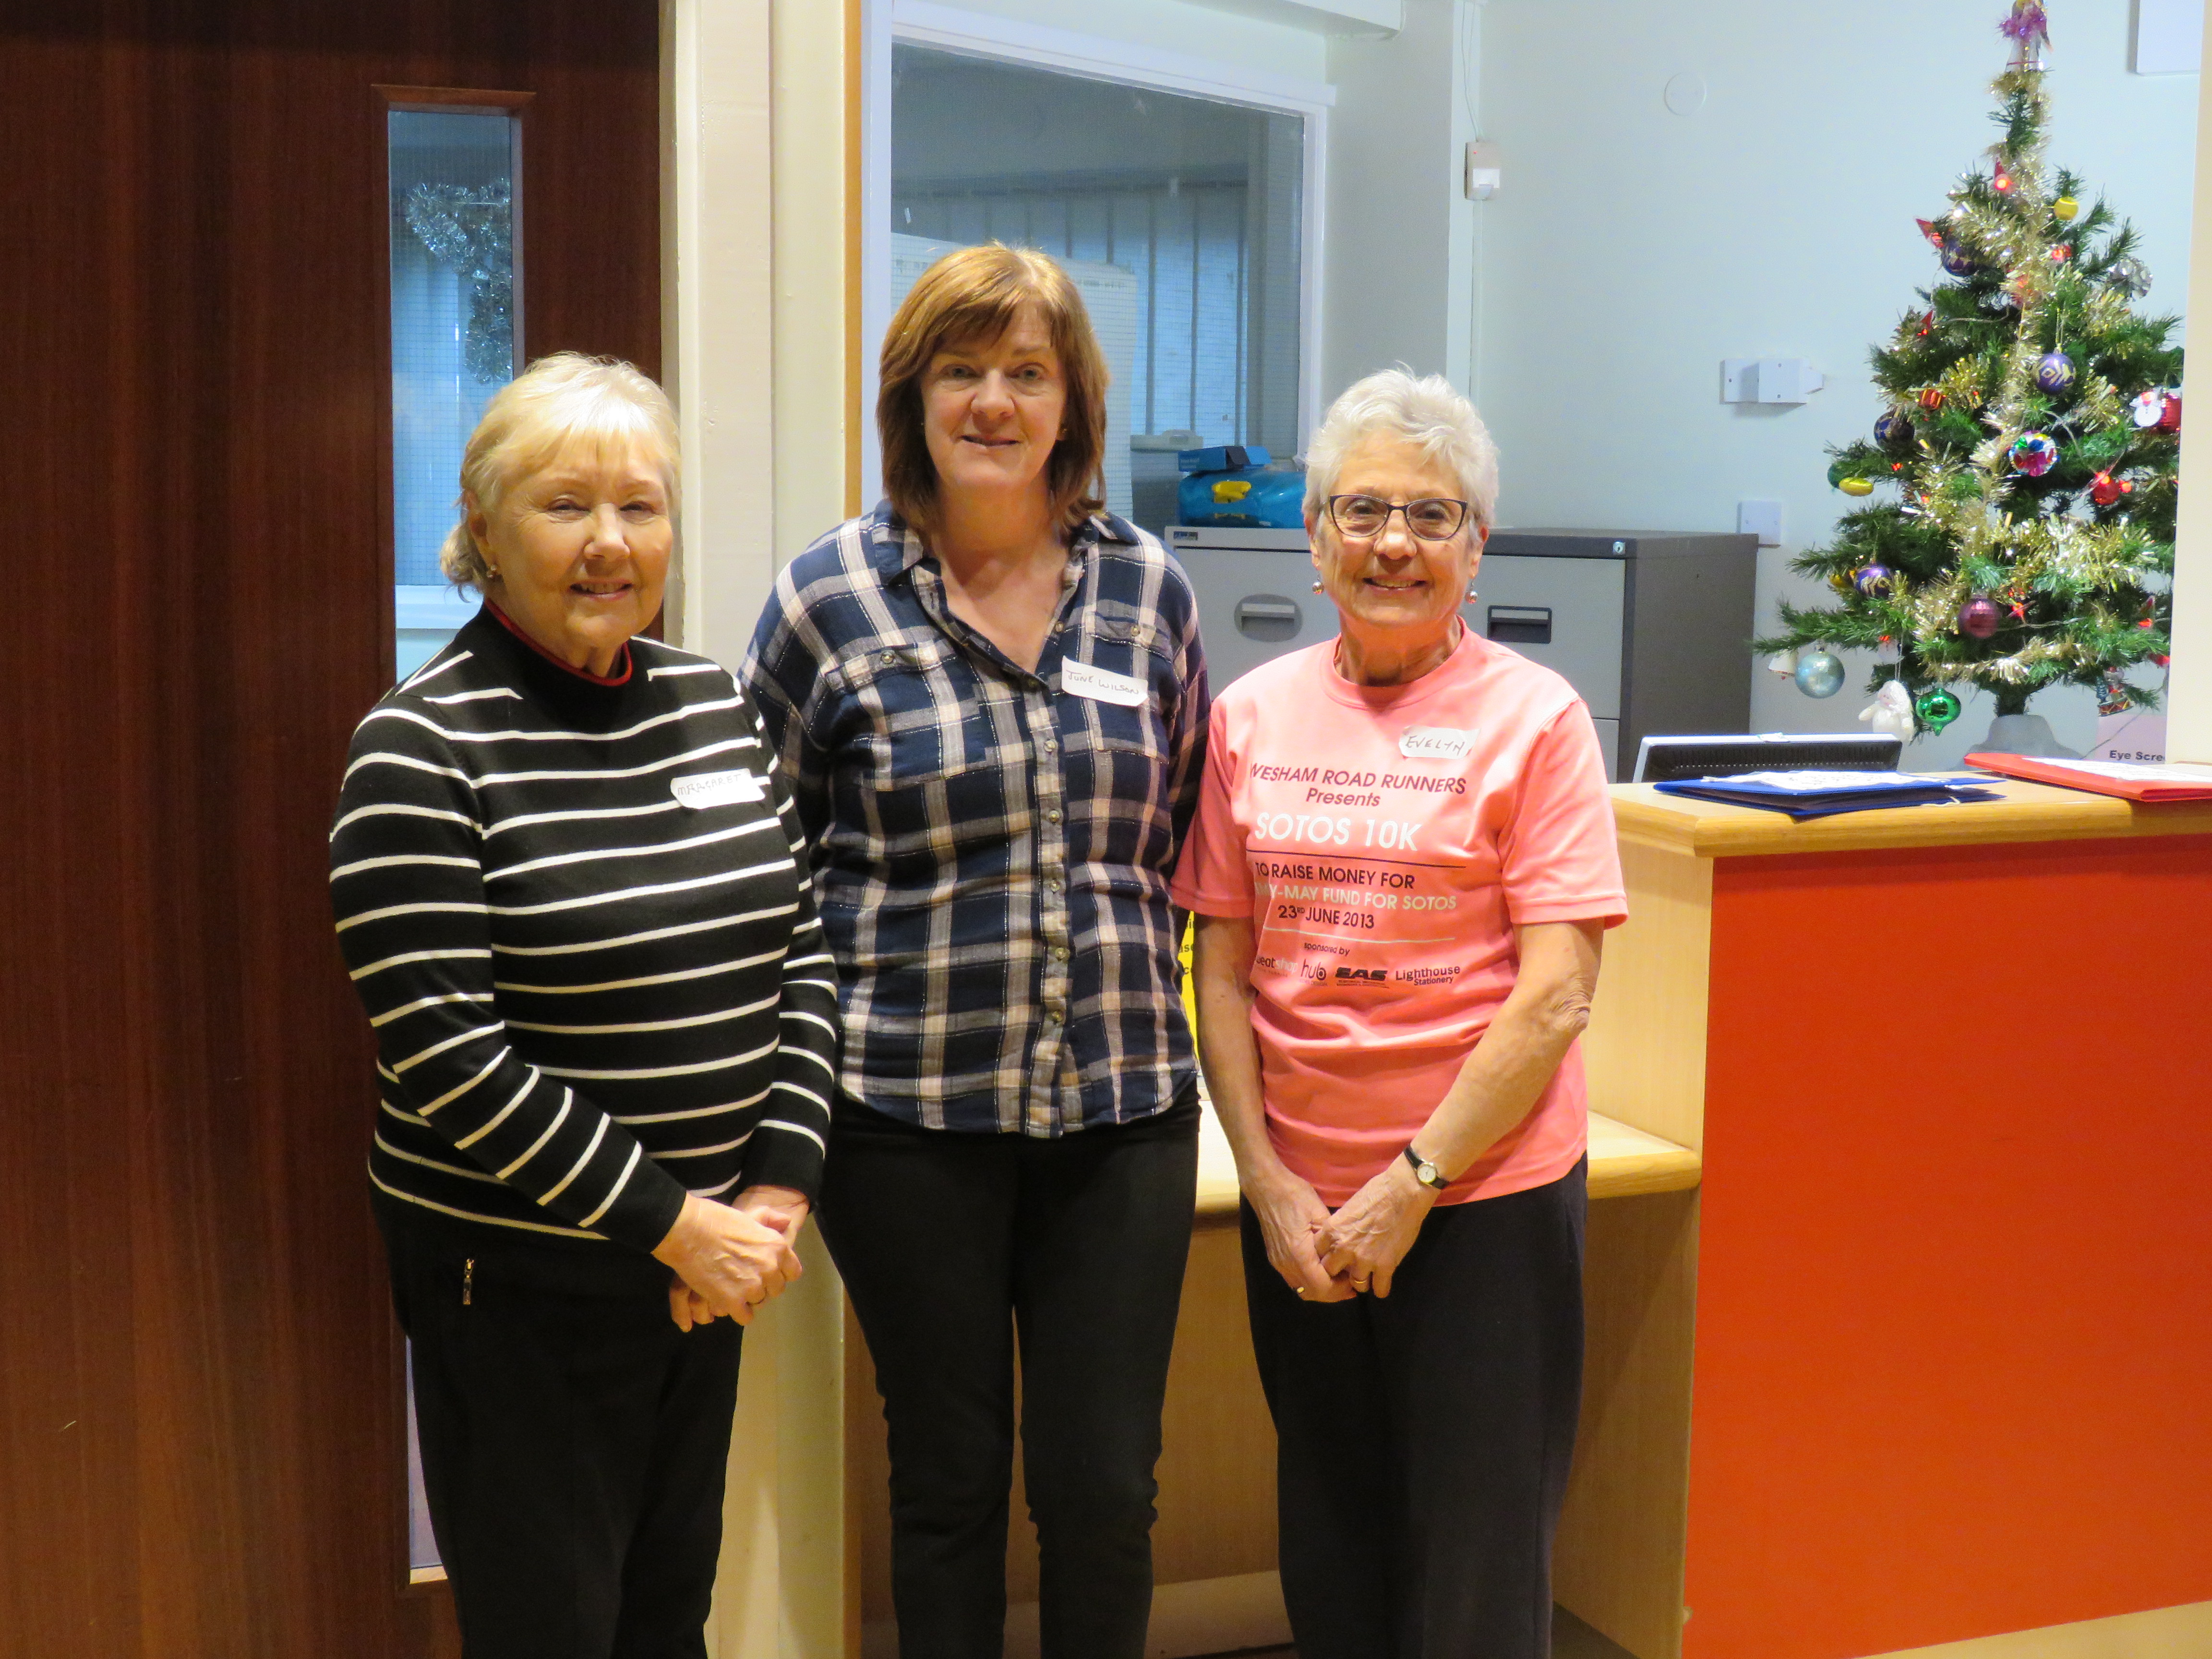 A programme to empower people to manage their musculoskeletal conditions has expanded to Carnforth featured image